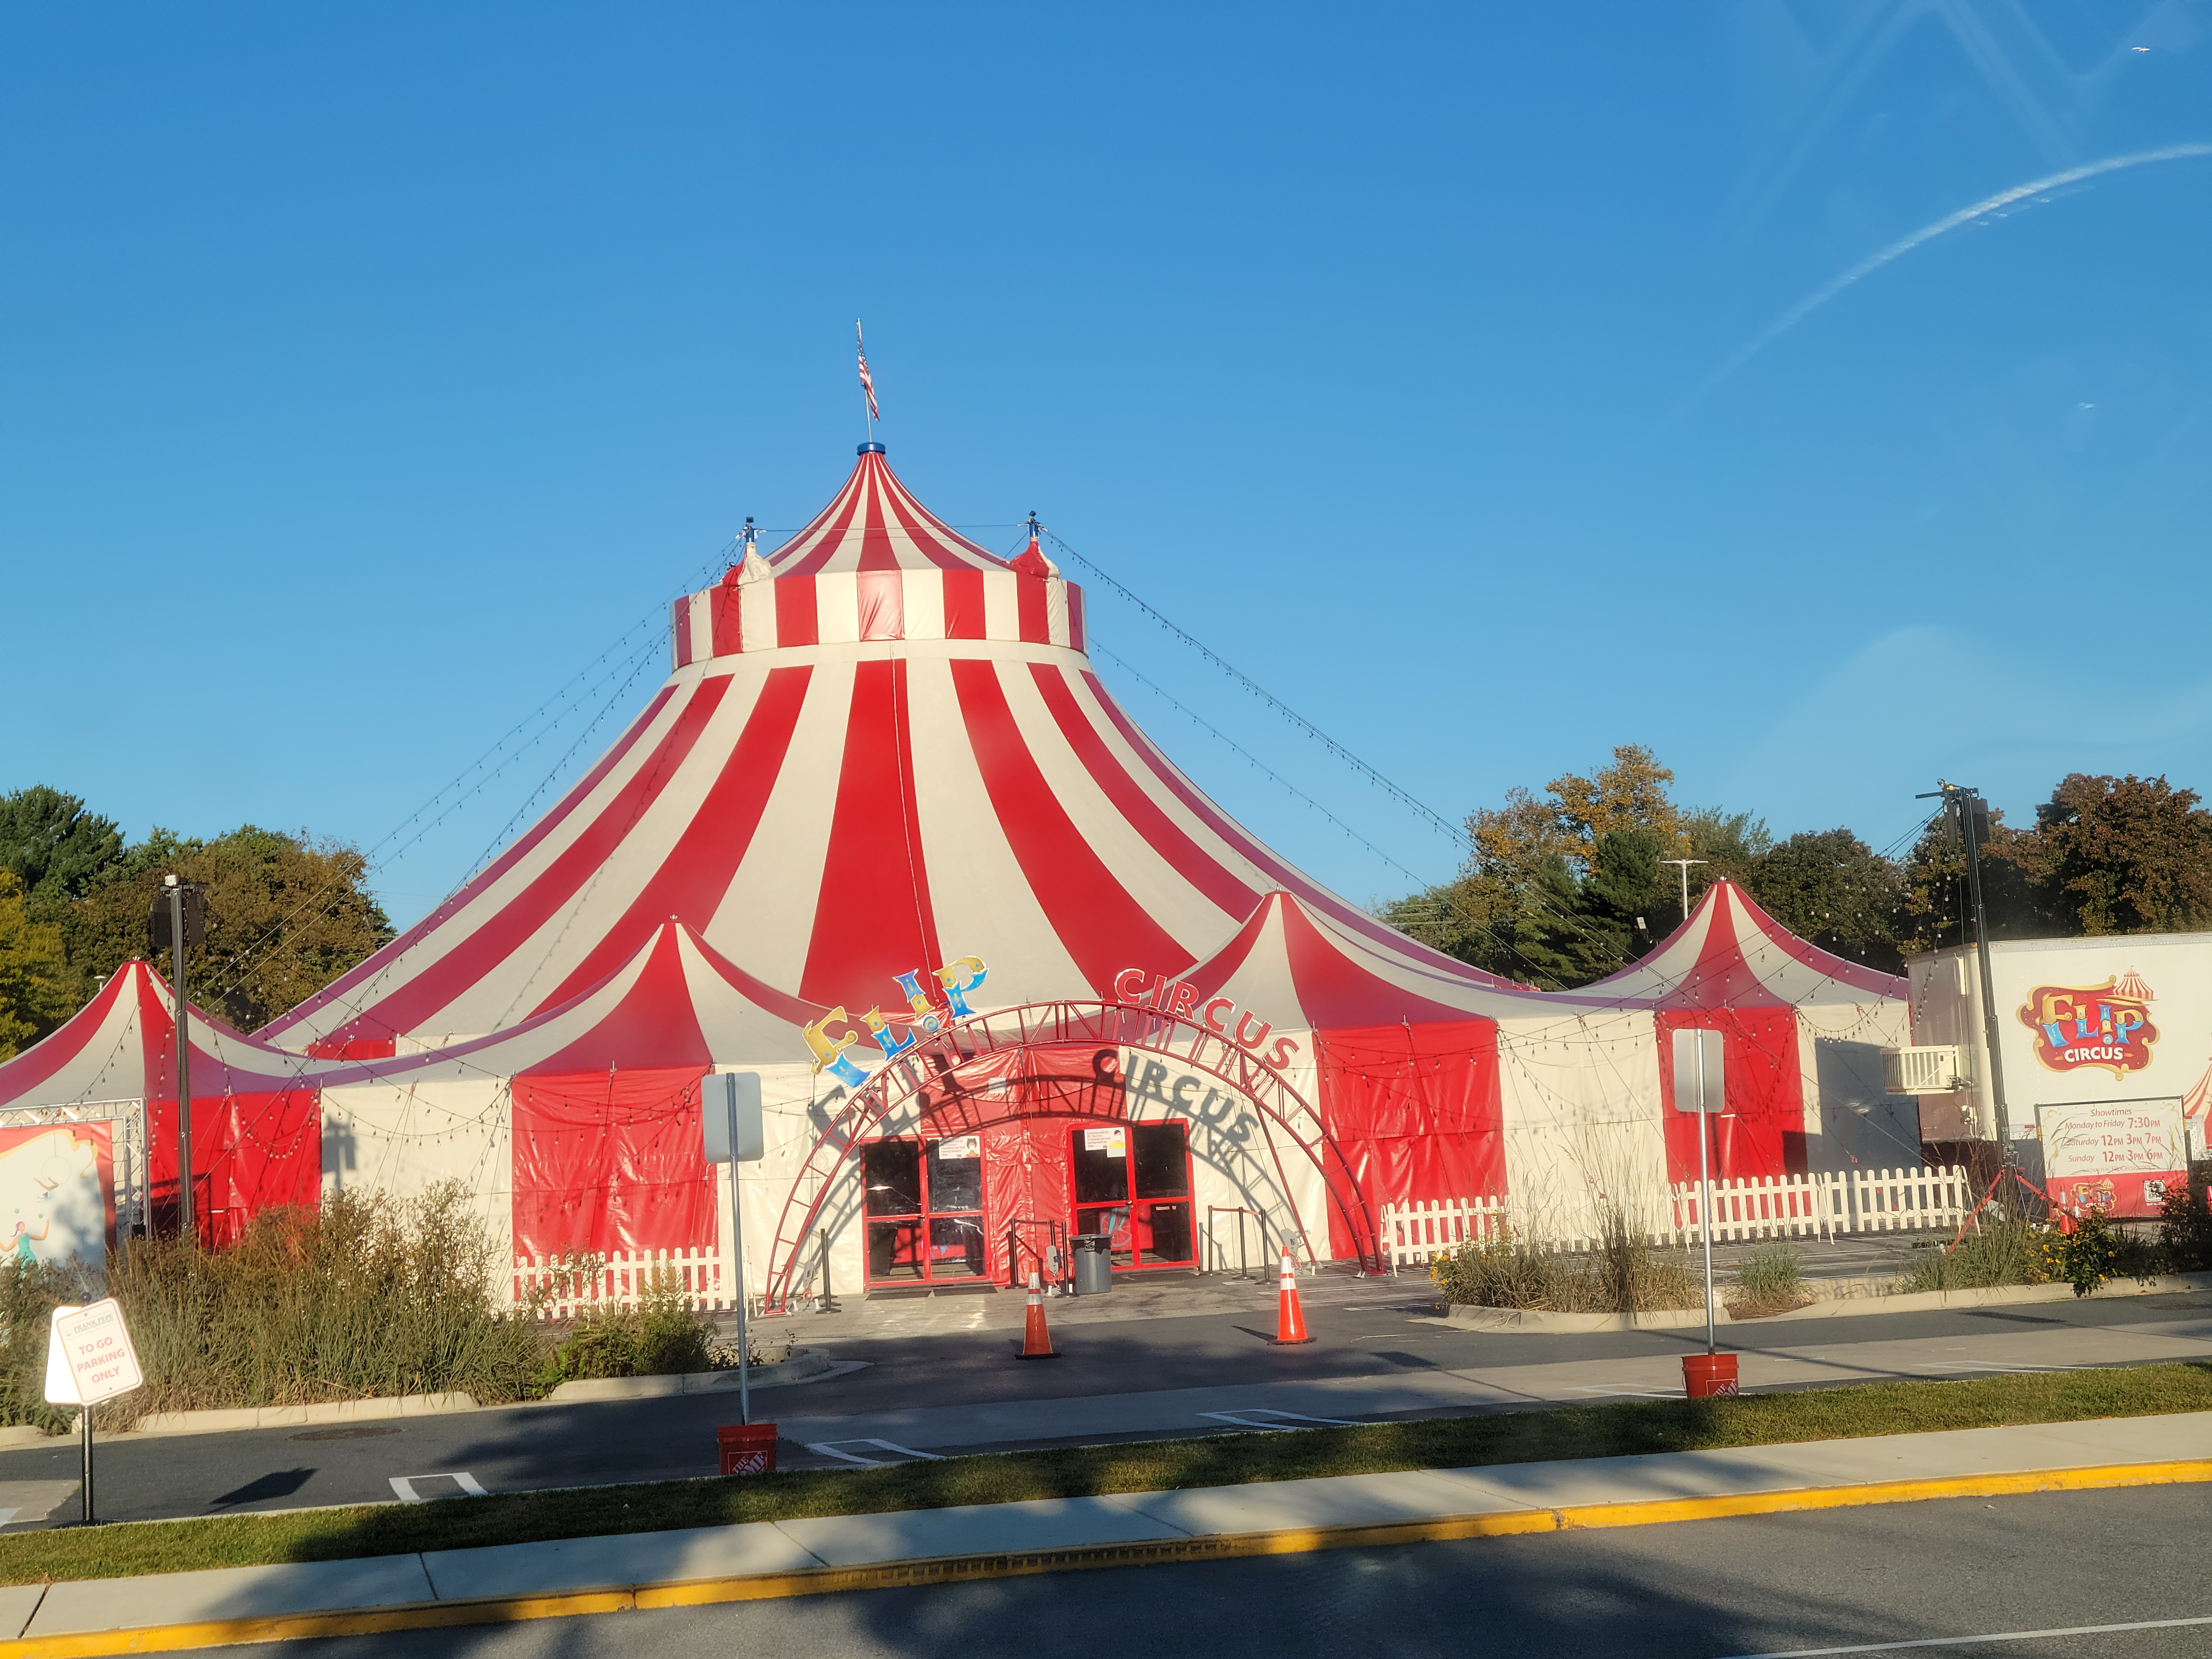 The big tent and entrance of a circus. The sunny sky shines on the tent.